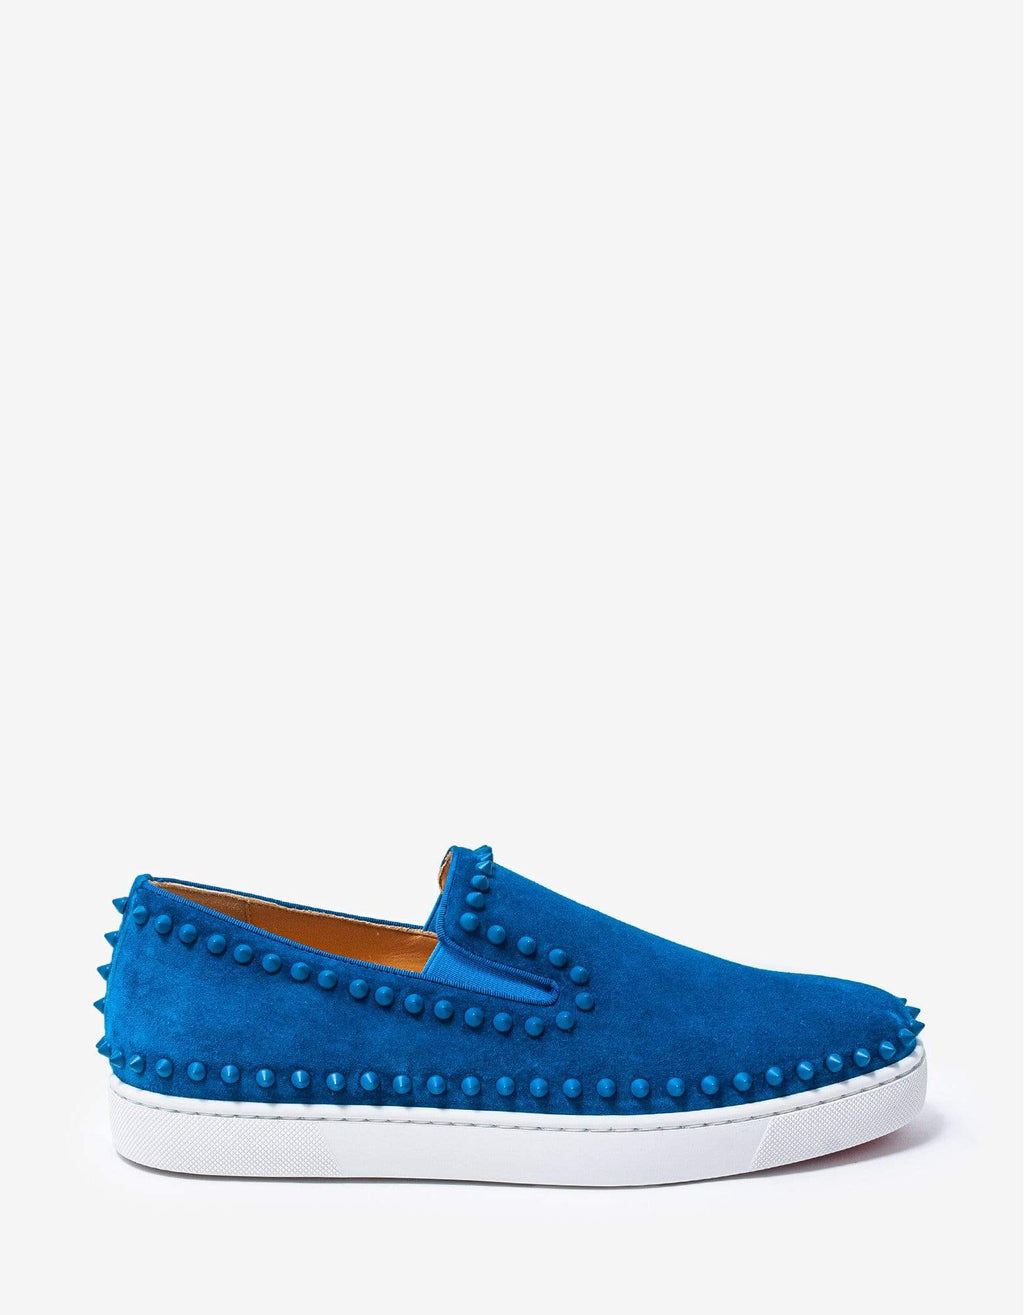 Christian Louboutin Pik Boat Blue Suede Leather Trainers